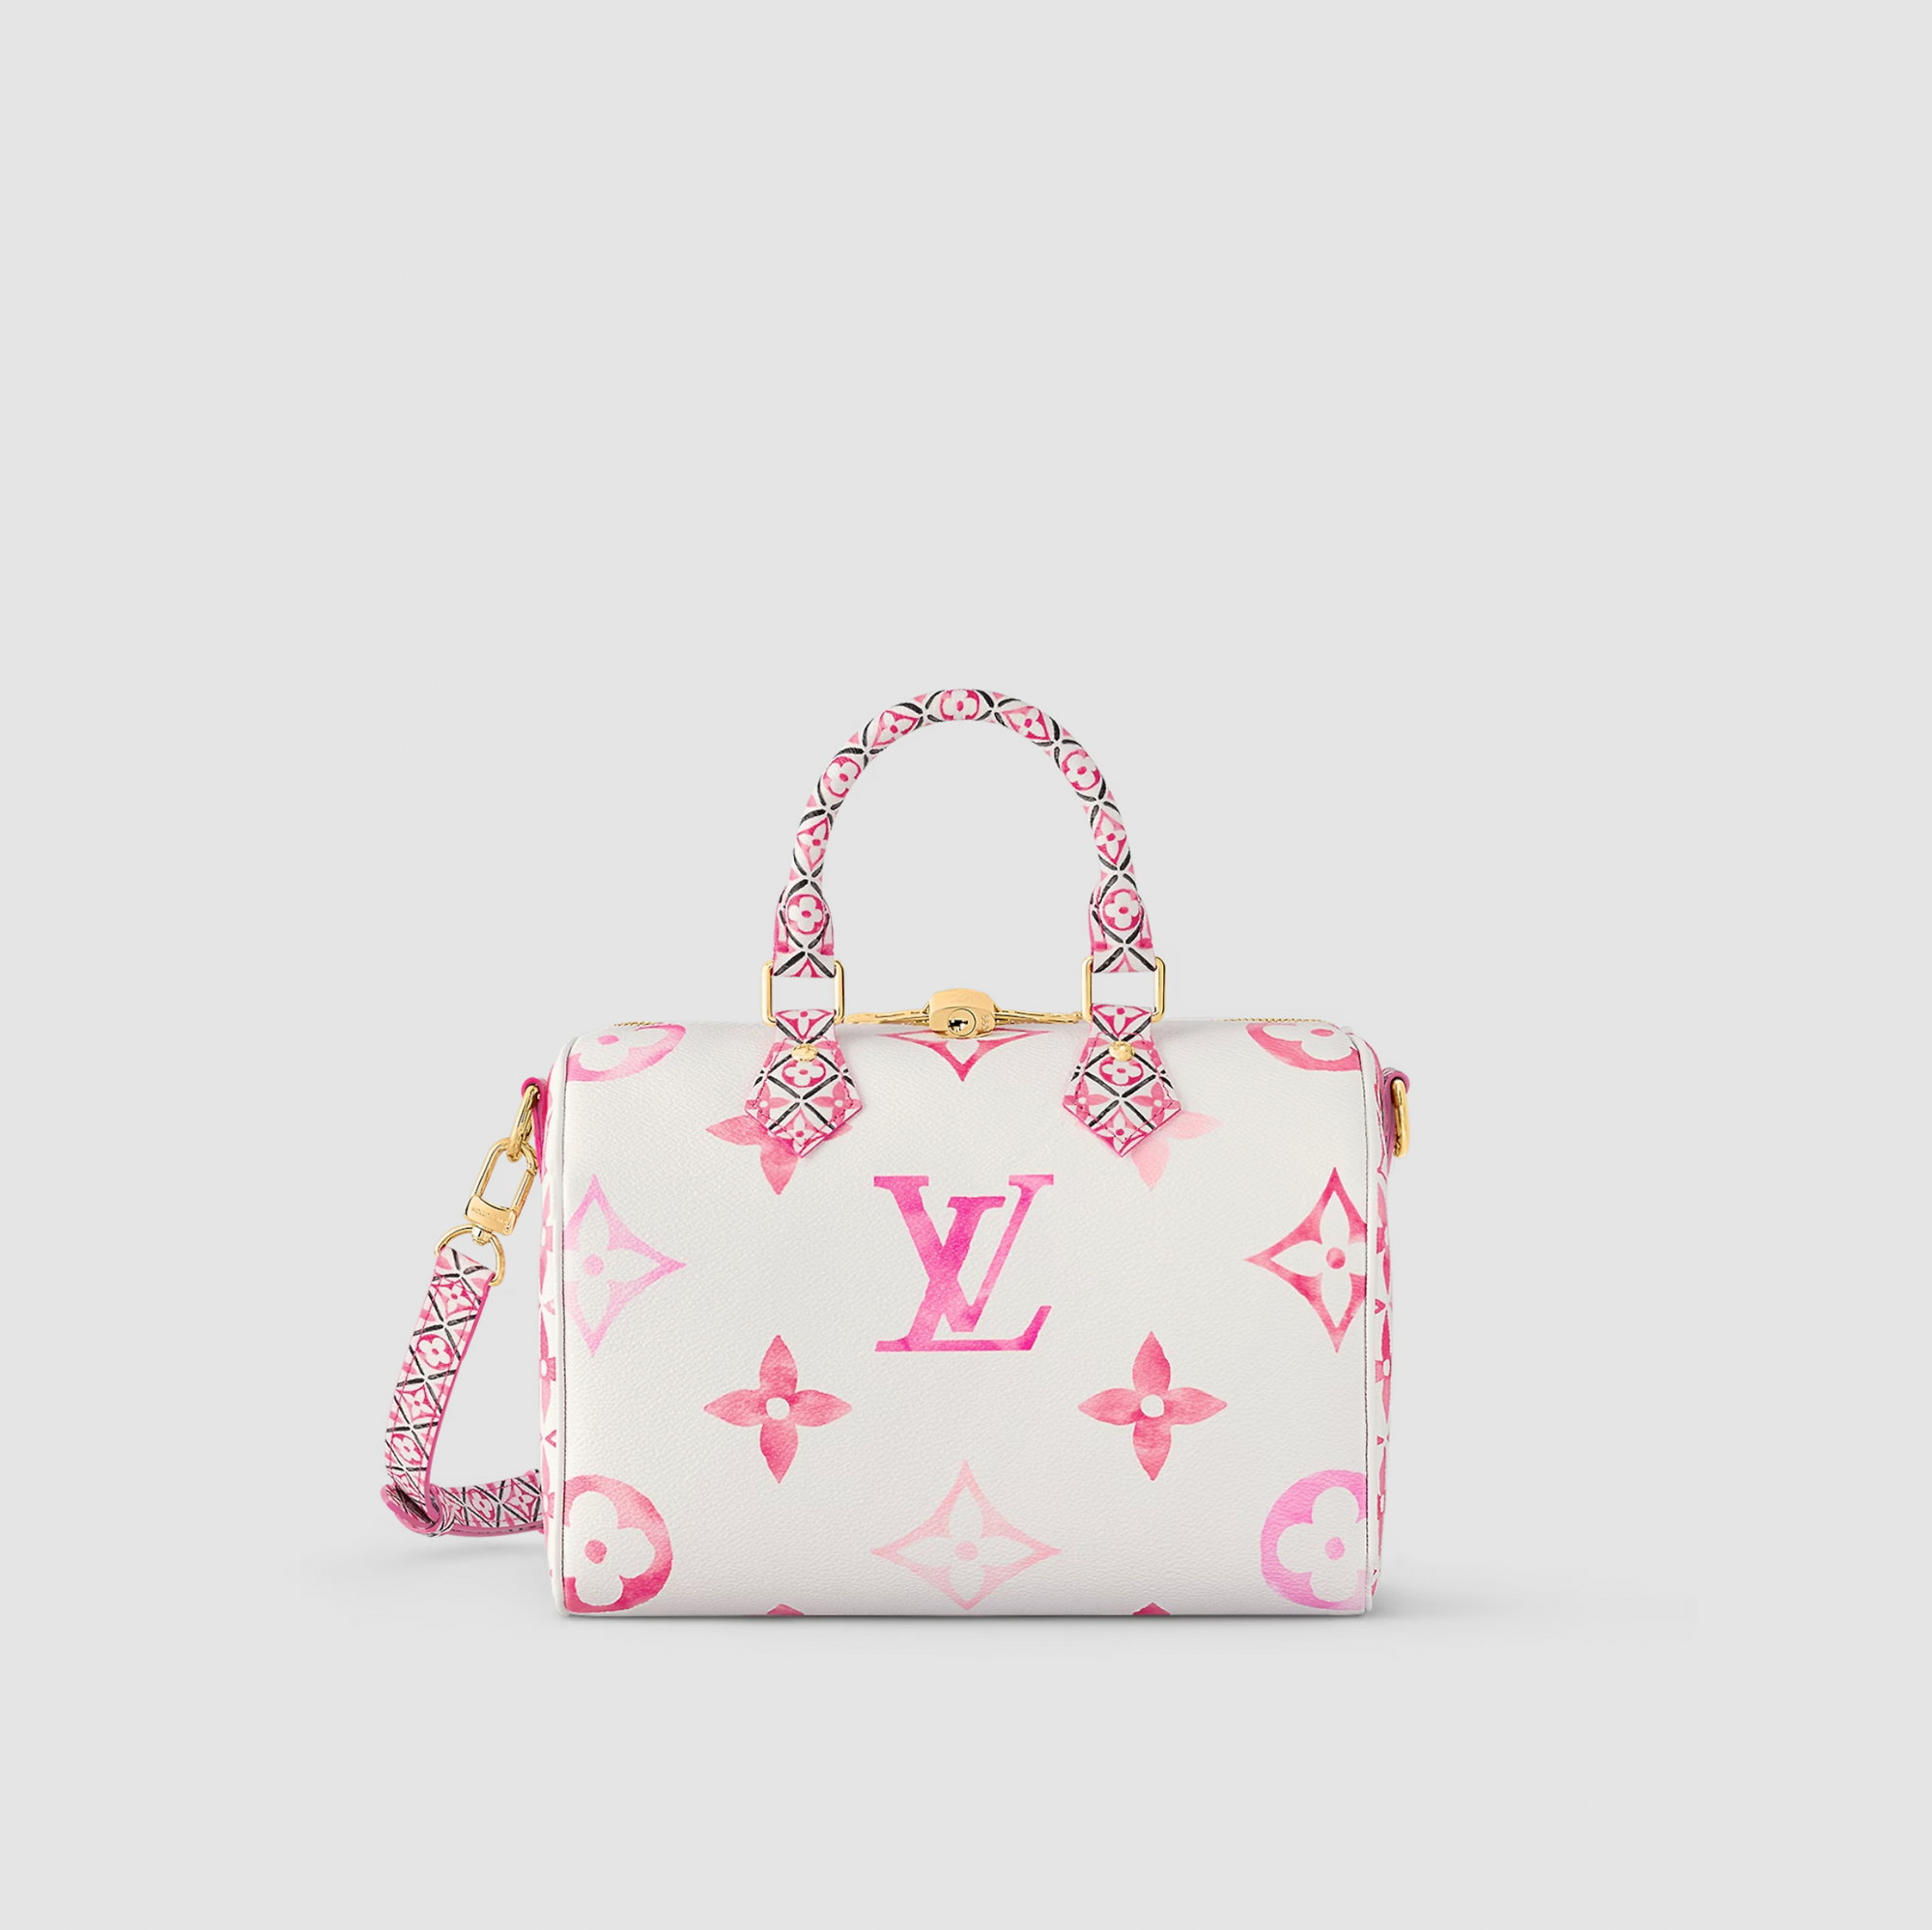 Louis Vuitton Speedy 25 vs 30 - Which One Is Right For You